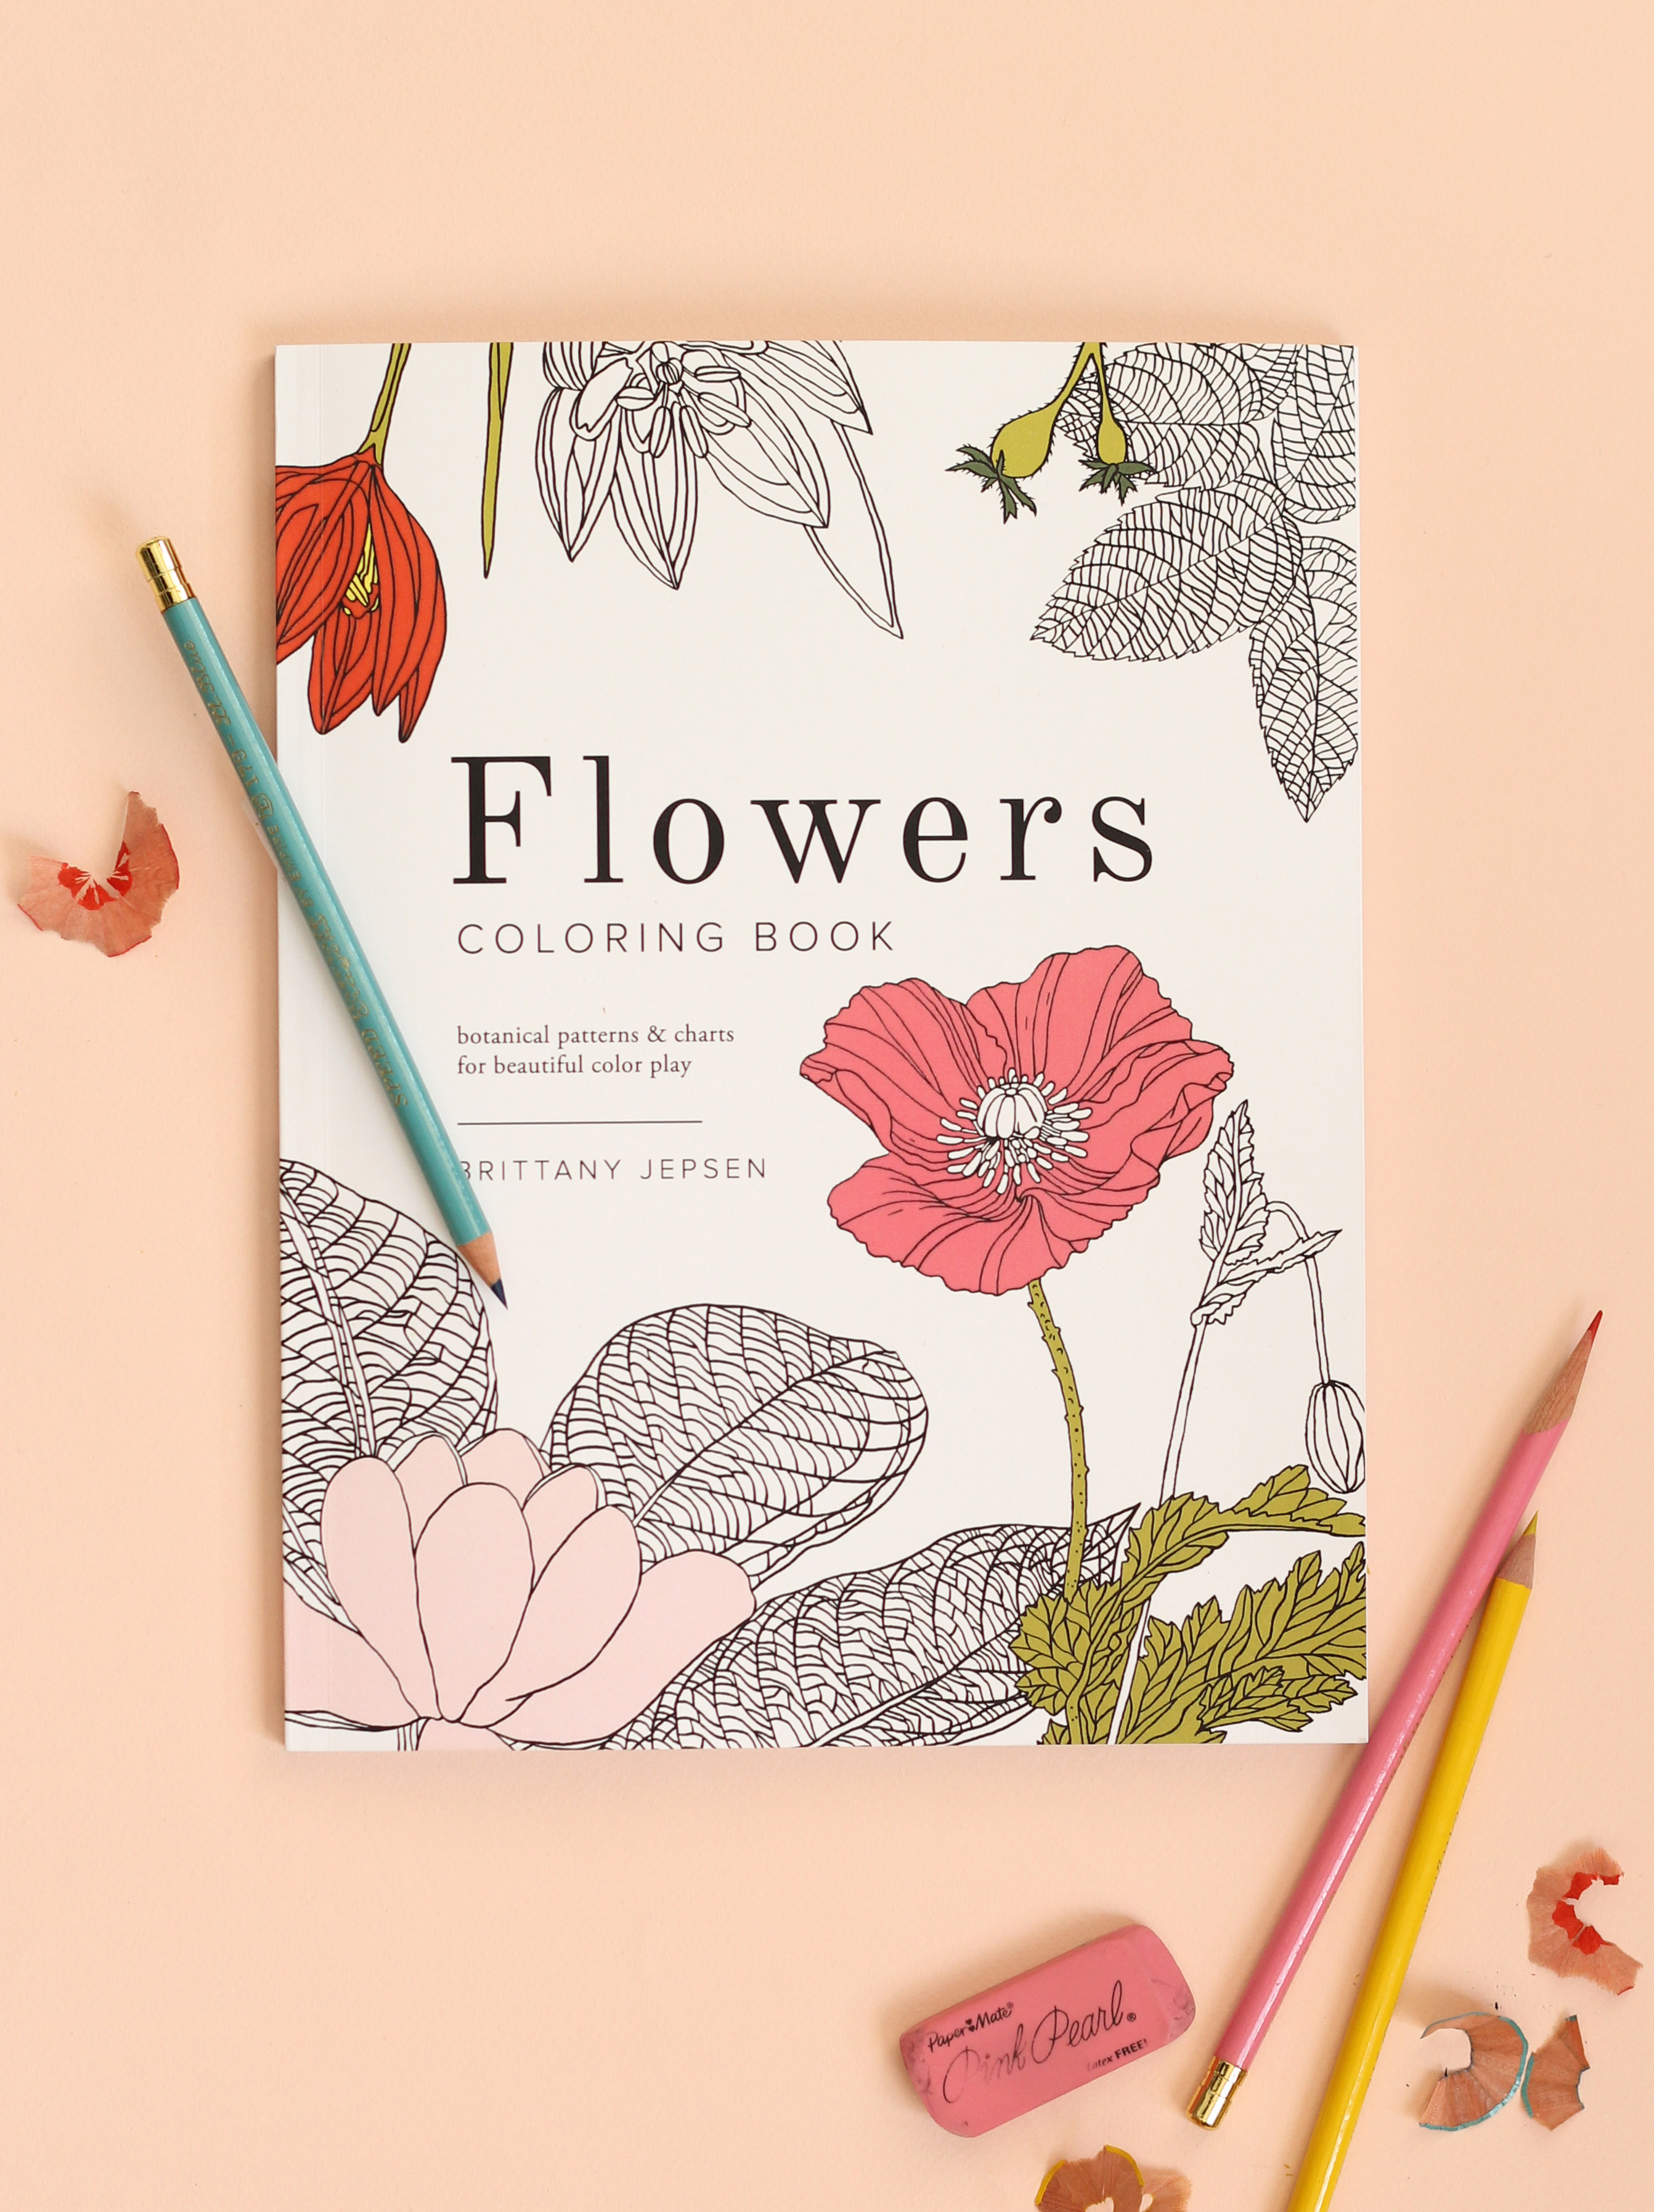 Flowers Coloring Book by The House That Lars Built